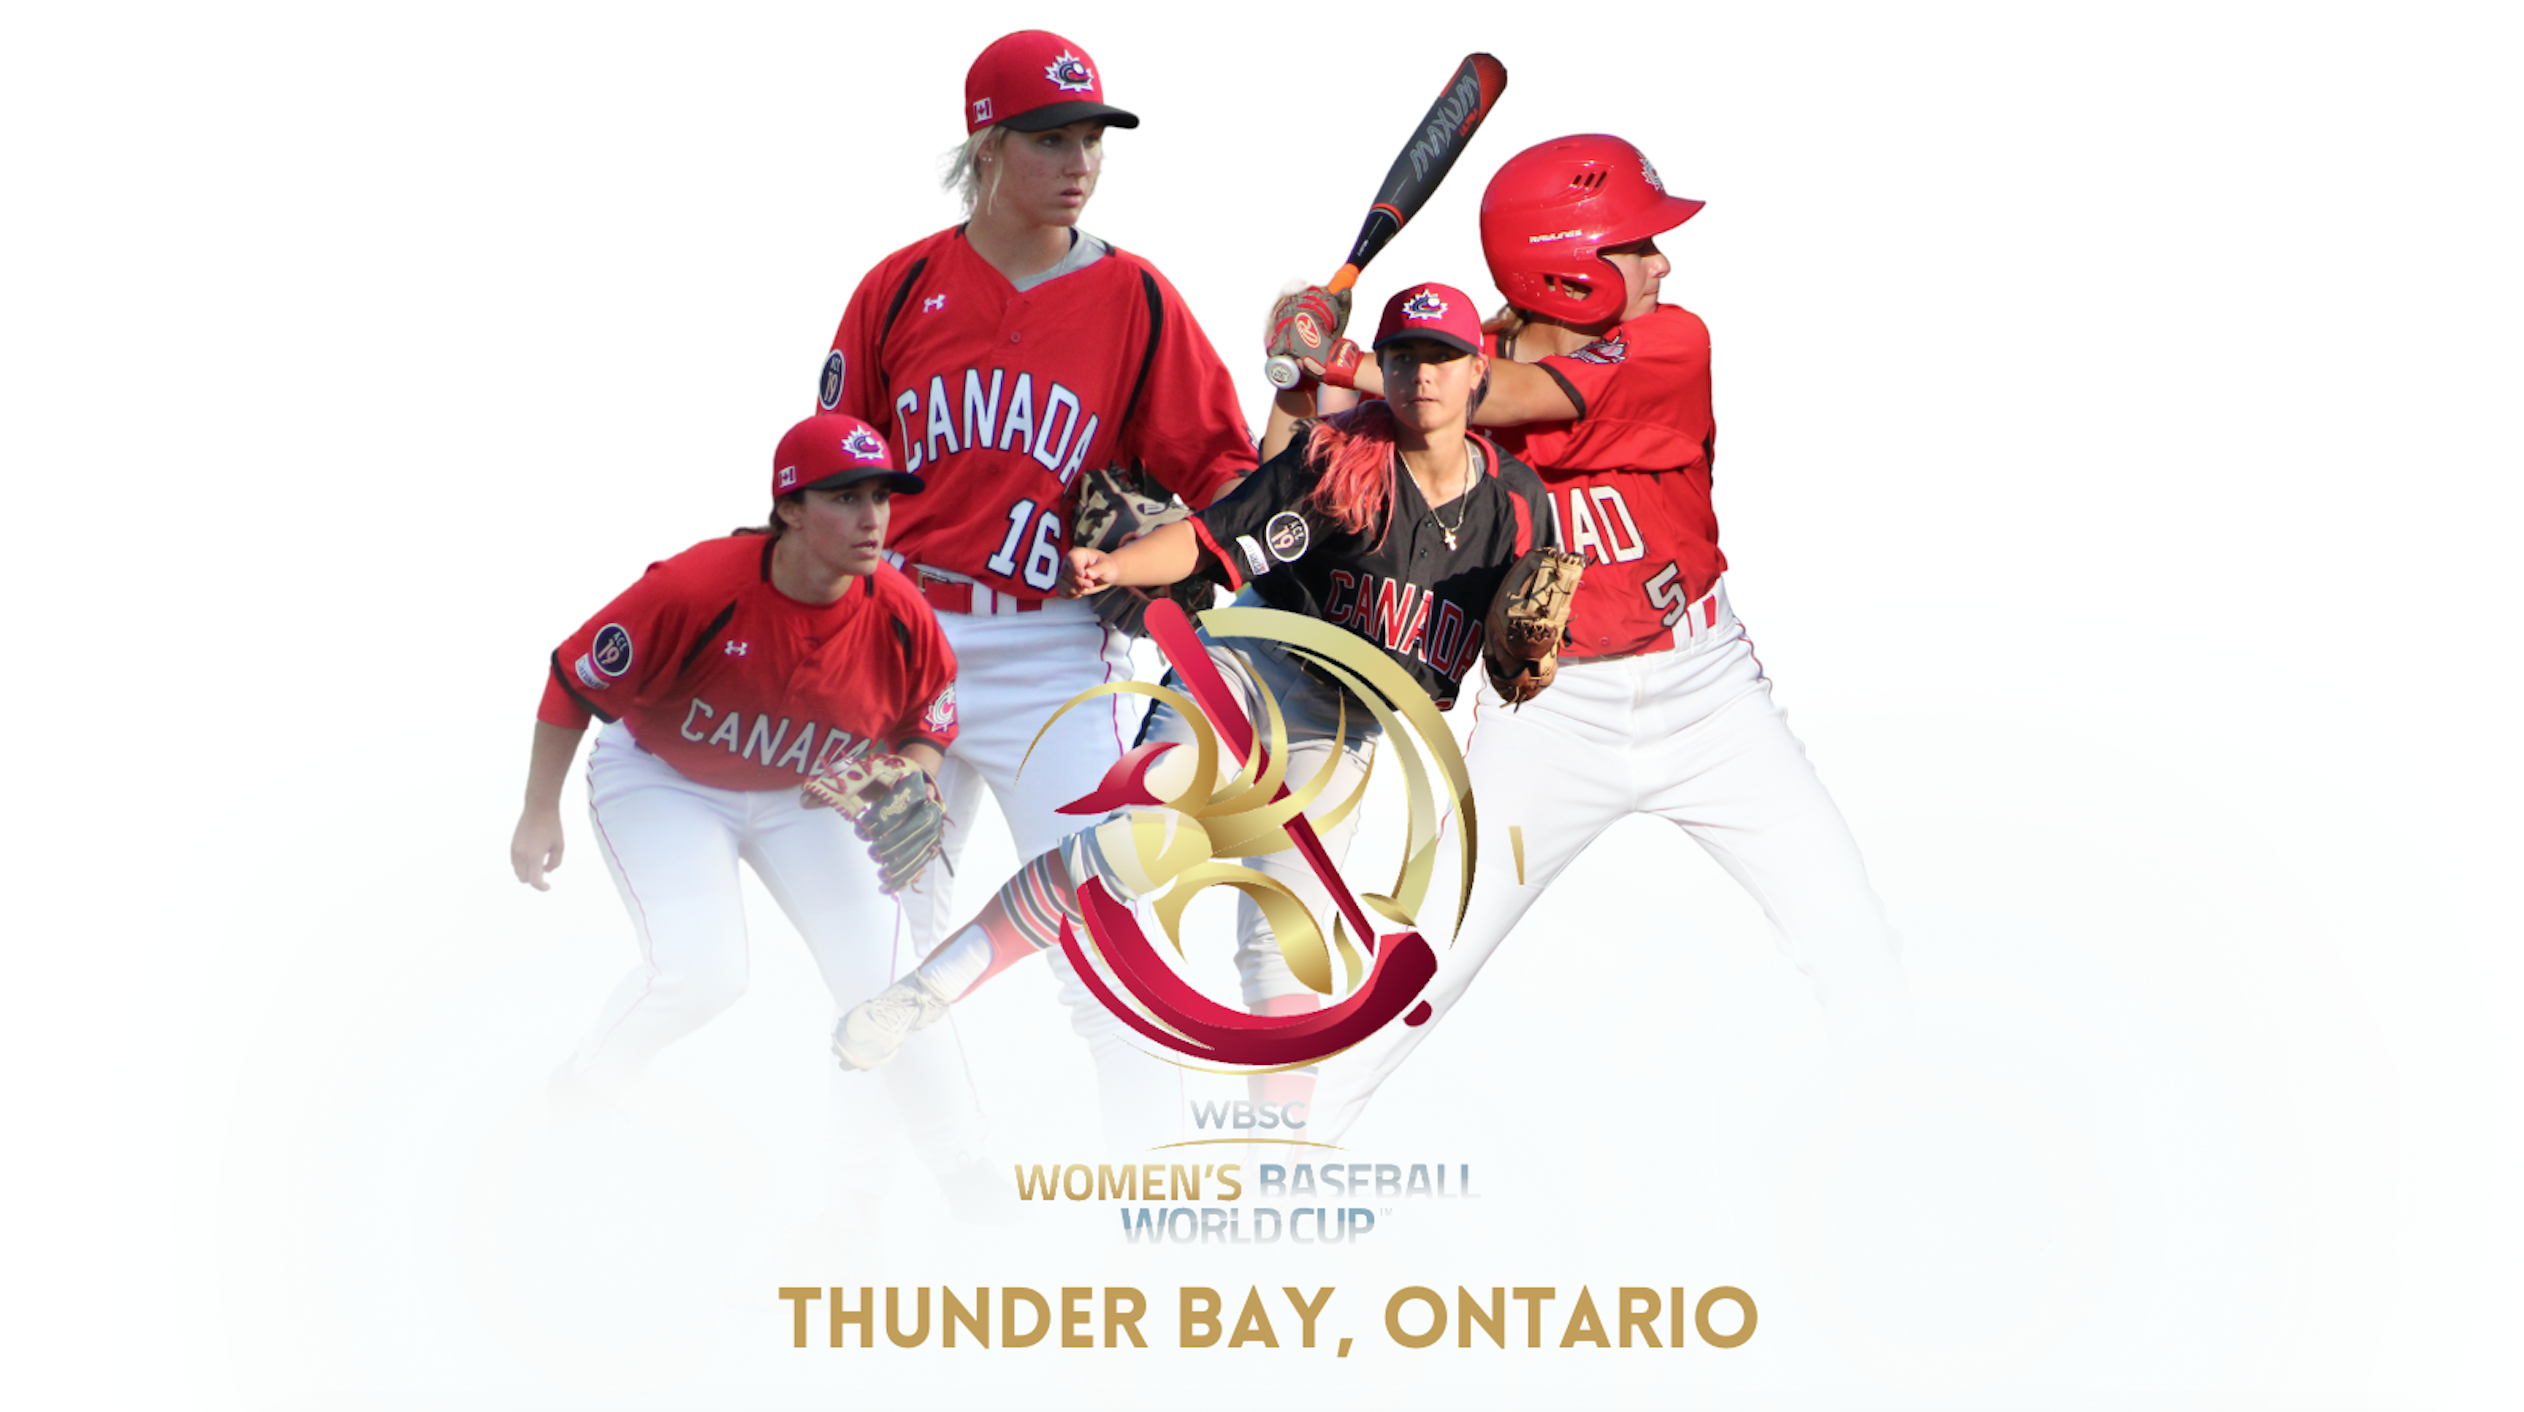 Thunder Bay awarded hosting rights for IX Women's Baseball World Cup group and final stage 